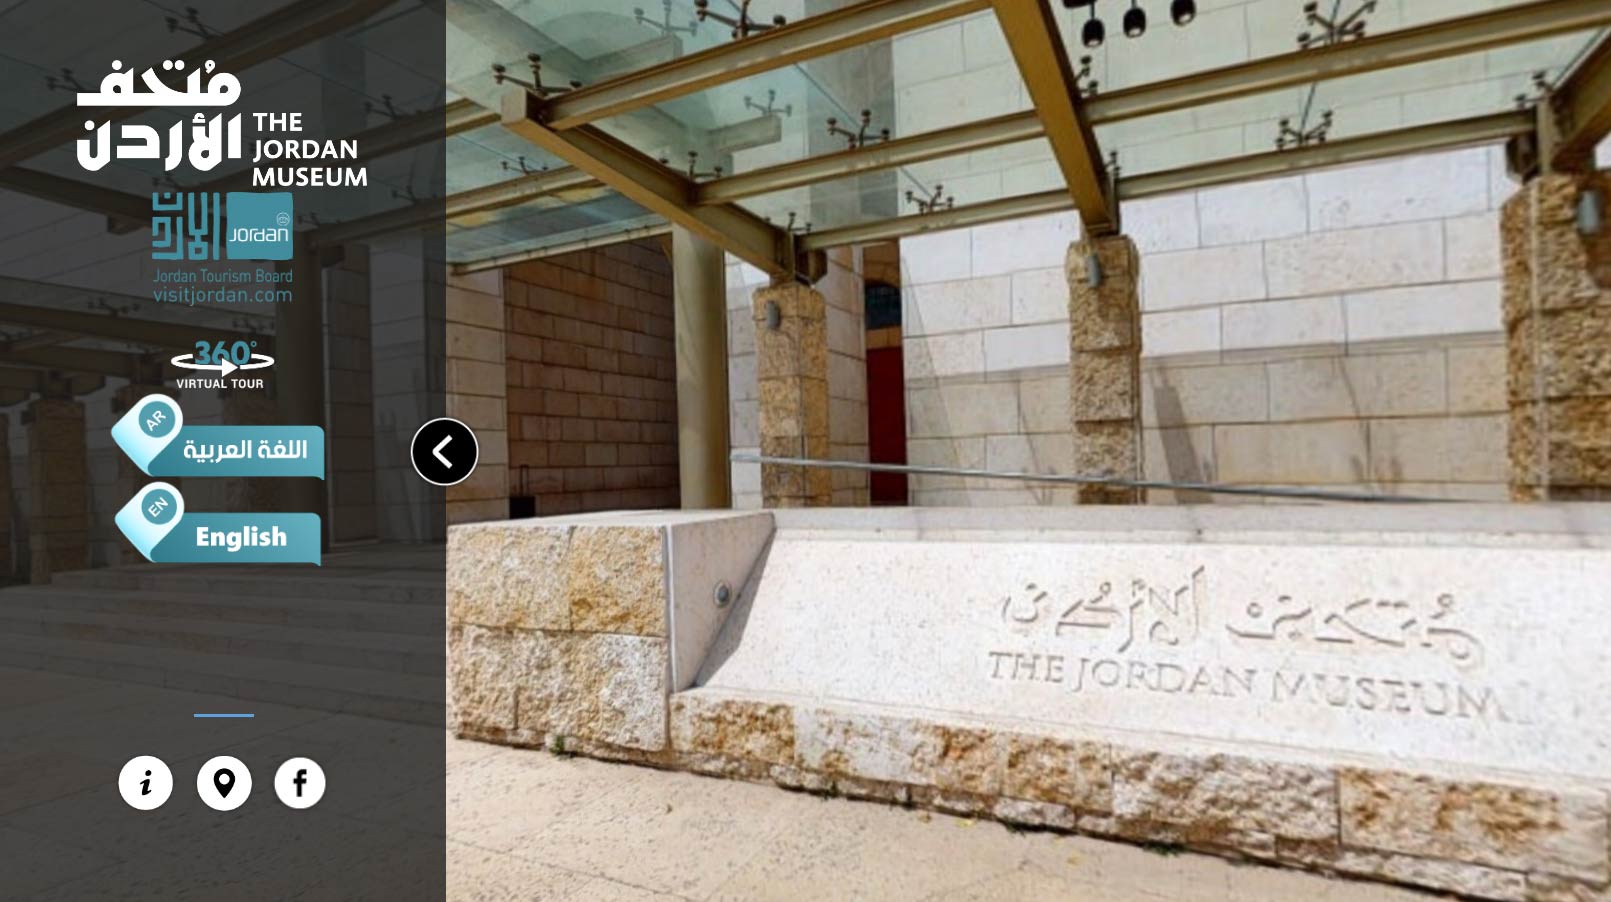 Amman’s Jordan Museum also offers a virtual tour of all its exhibits